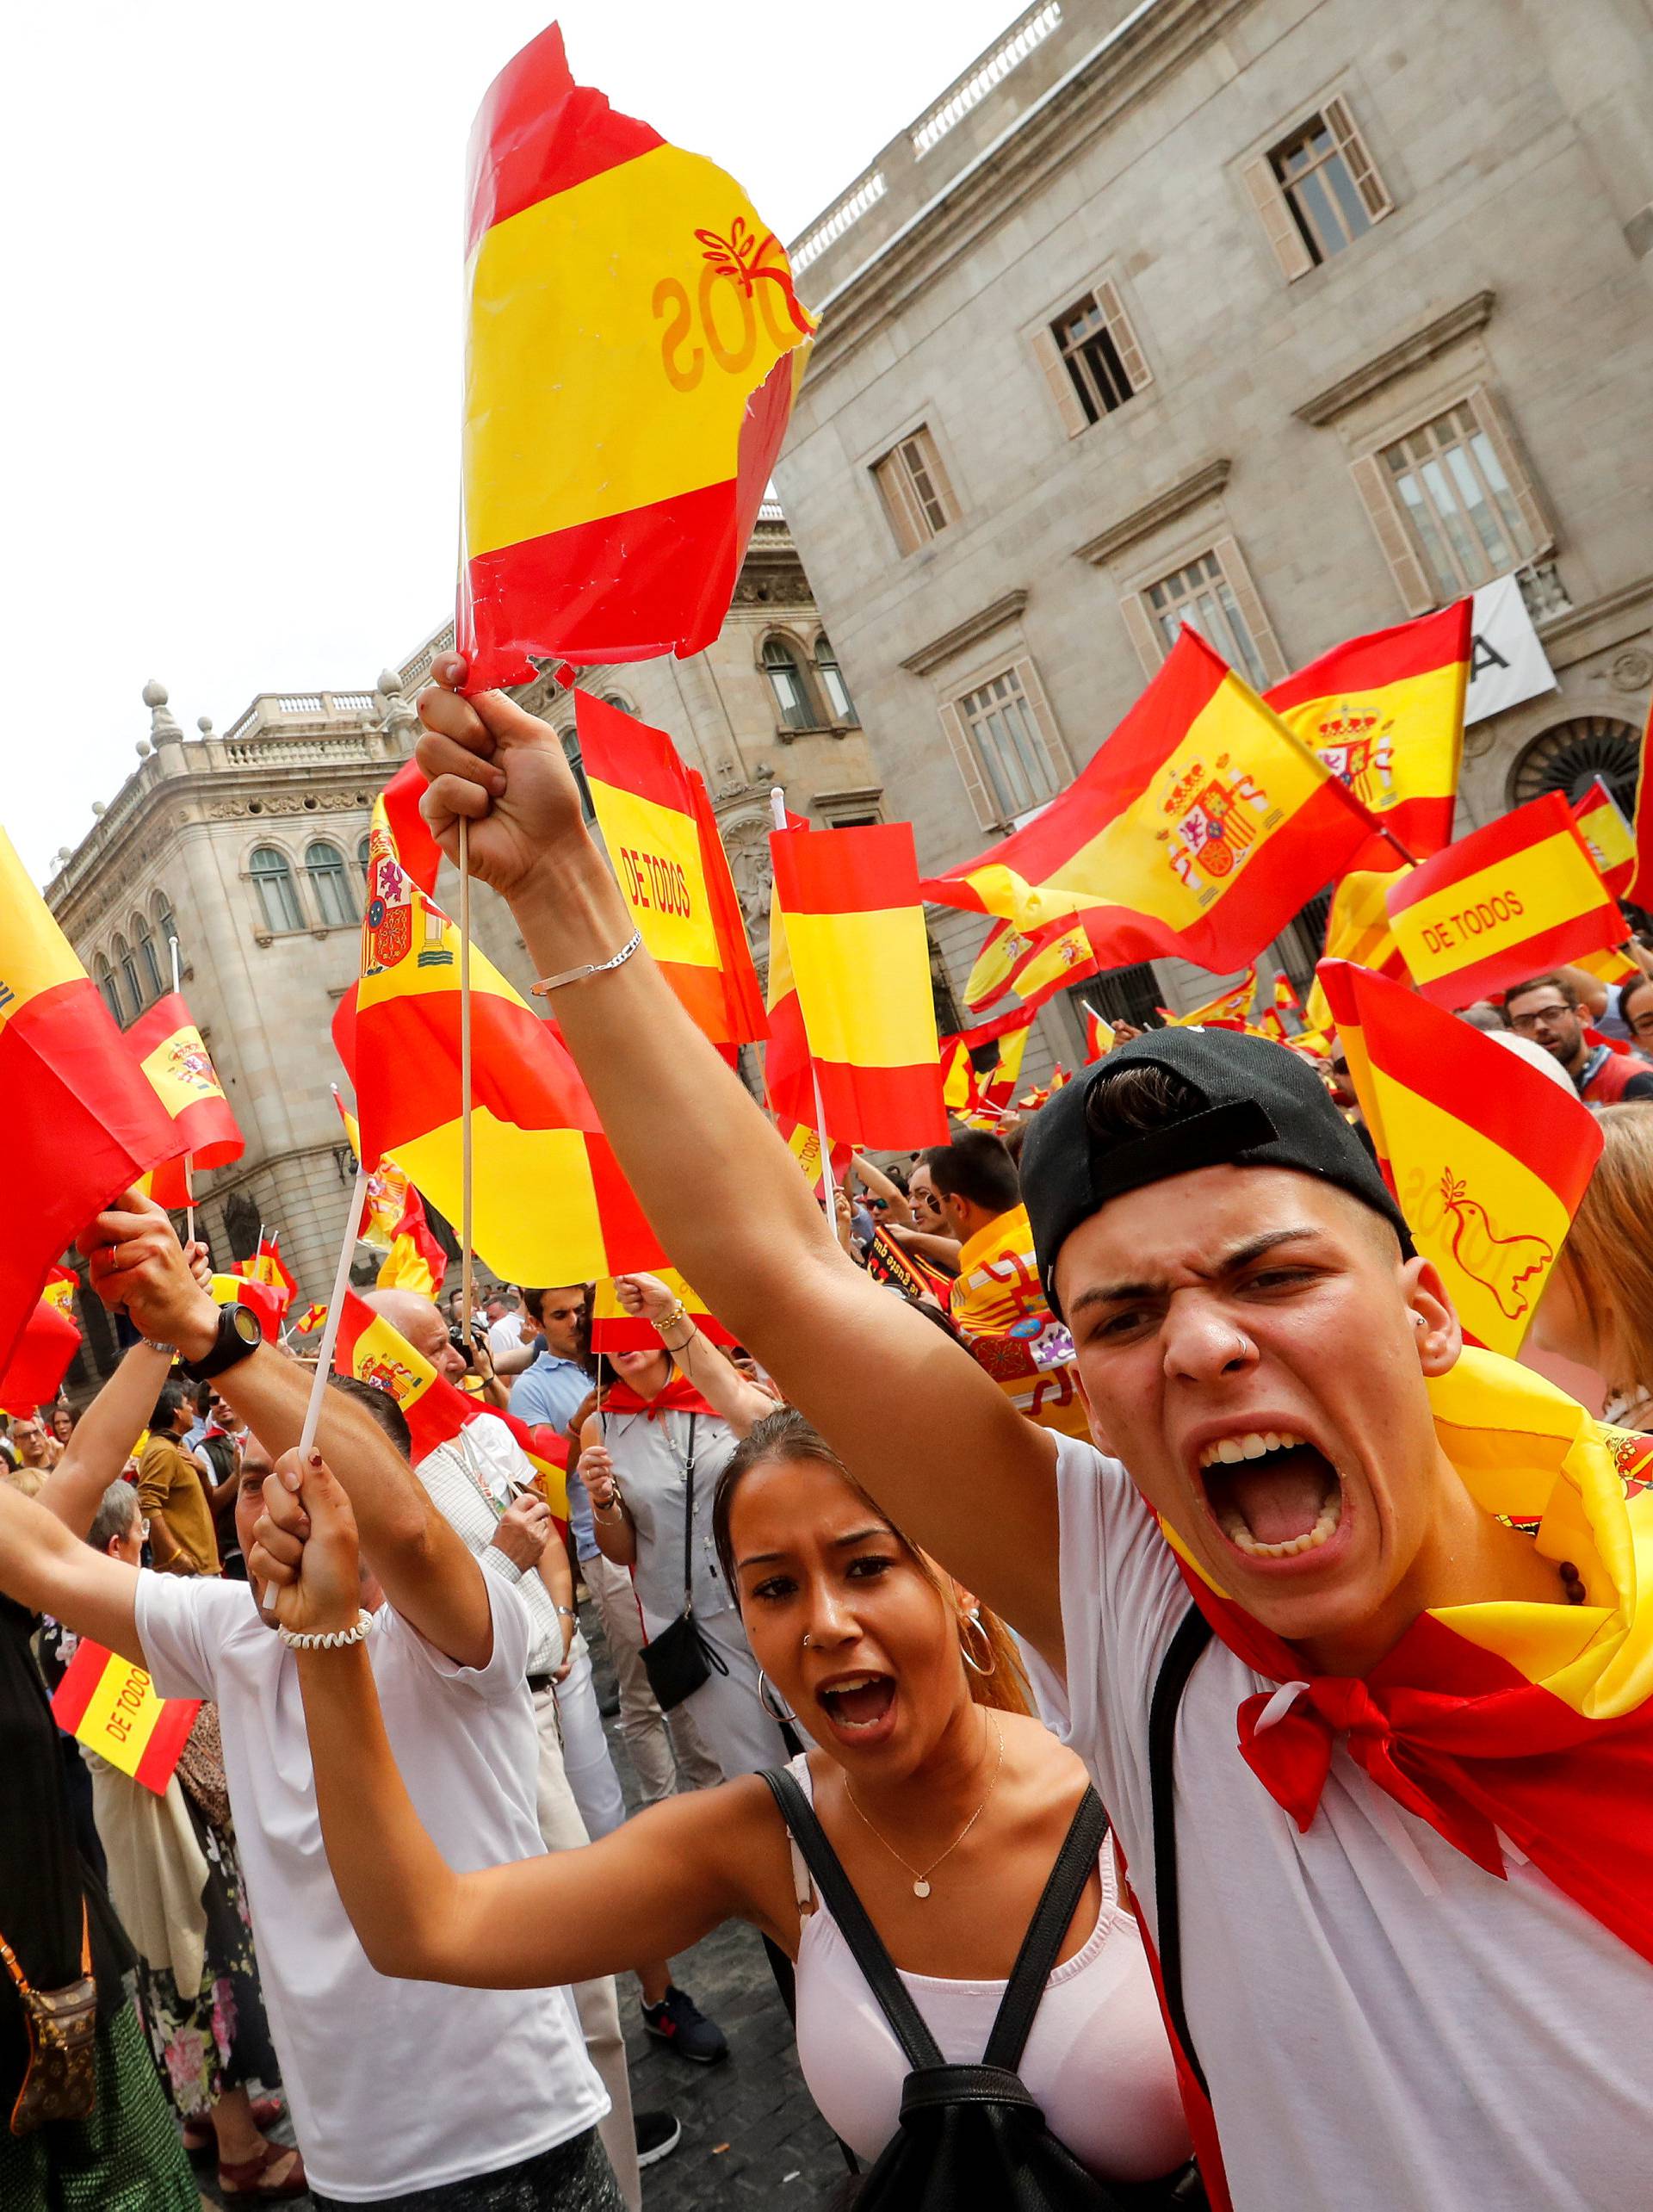 People shout and hold up Spanish flags during a demonstration in favor of a unified Spain a day before the banned October 1 independence referendum, in Barcelona